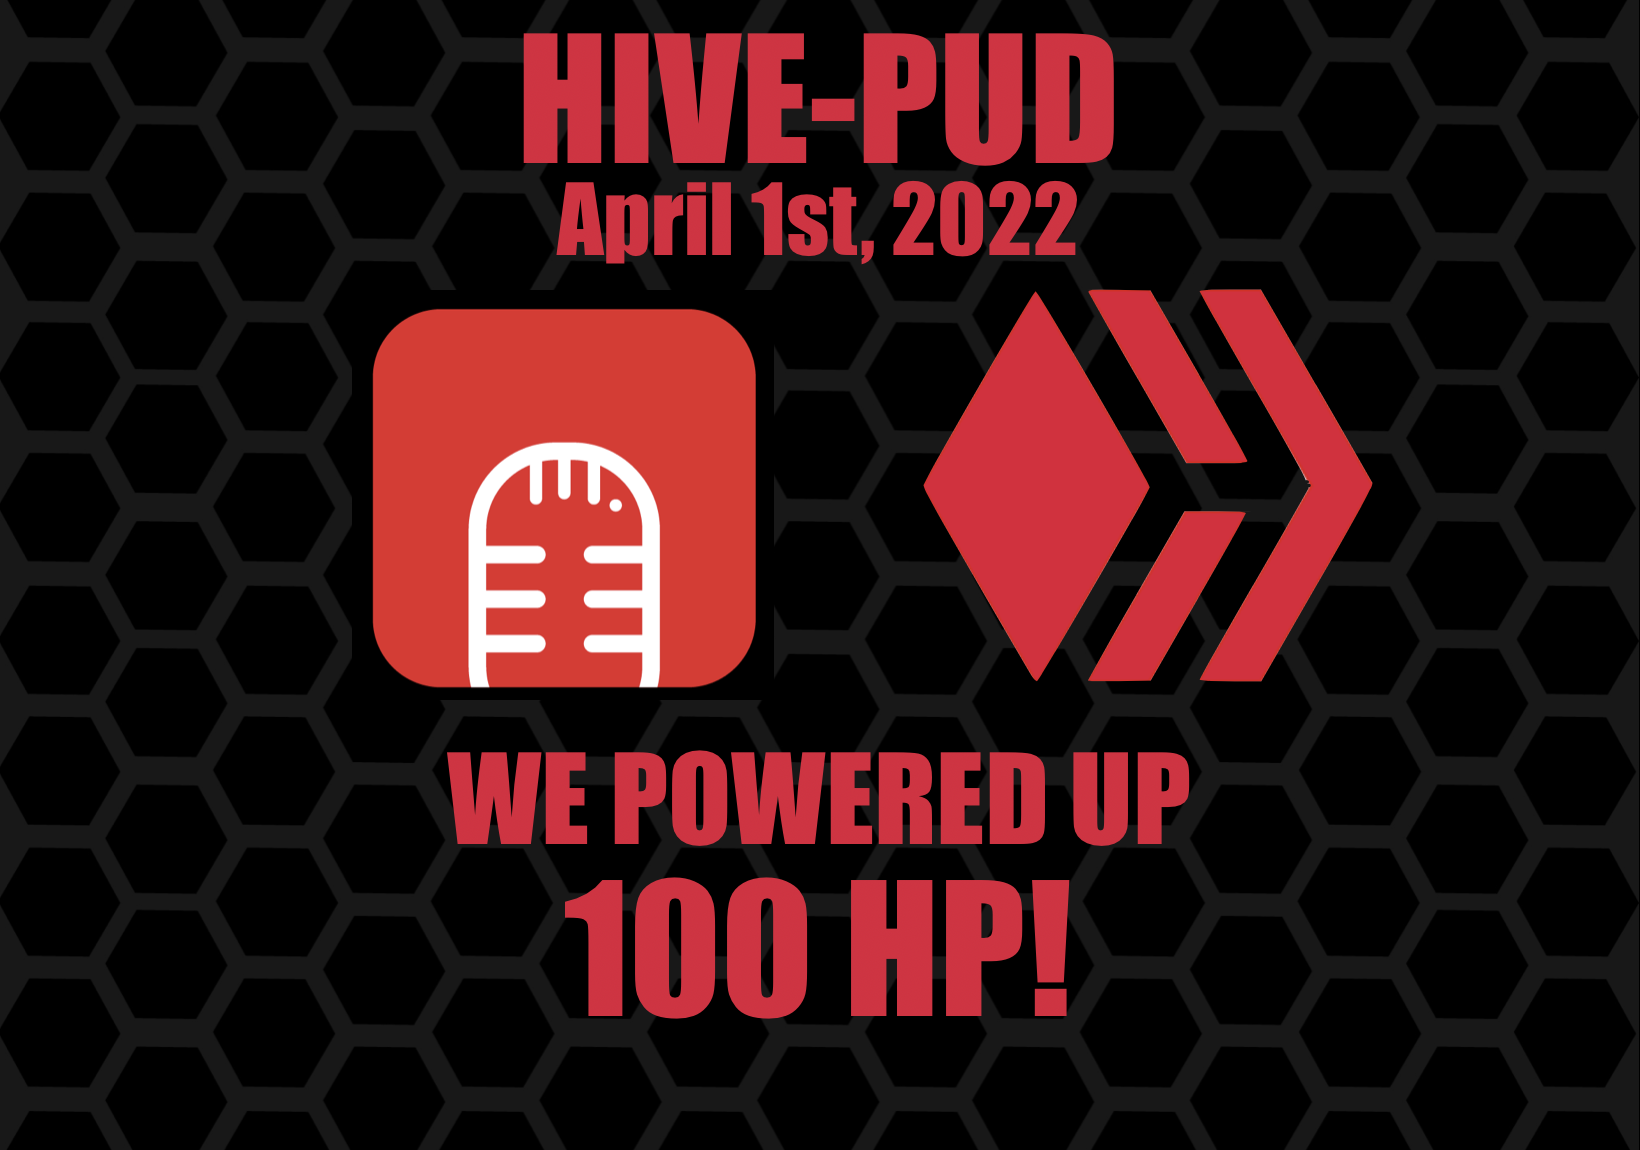 @recording-box/powered-up-100hp-for-april-1st-2022-hpud